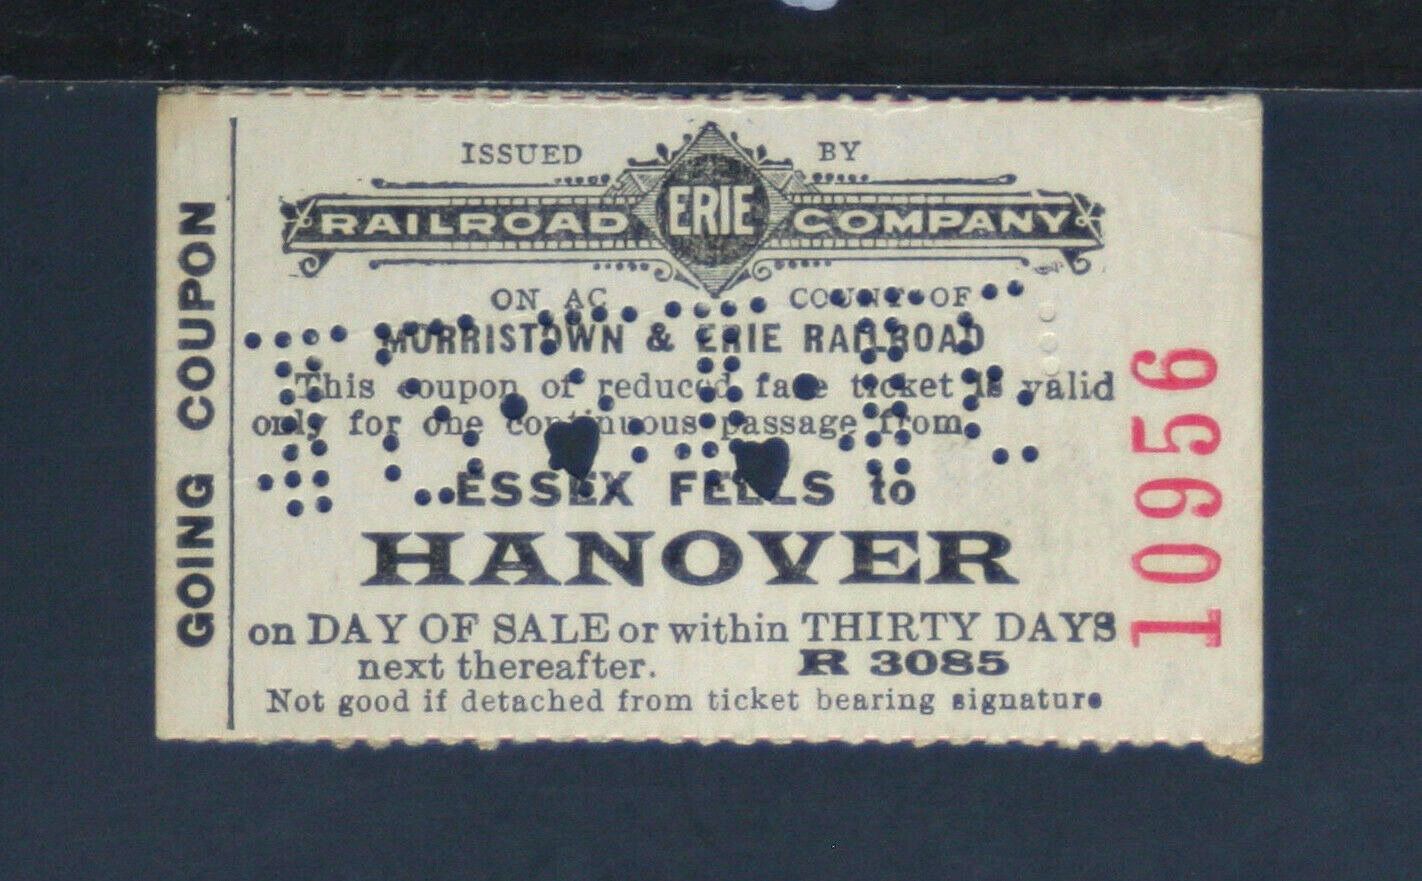 Erie Railroad Co Ticket  Essex Fells to Hanover 1916   RR129